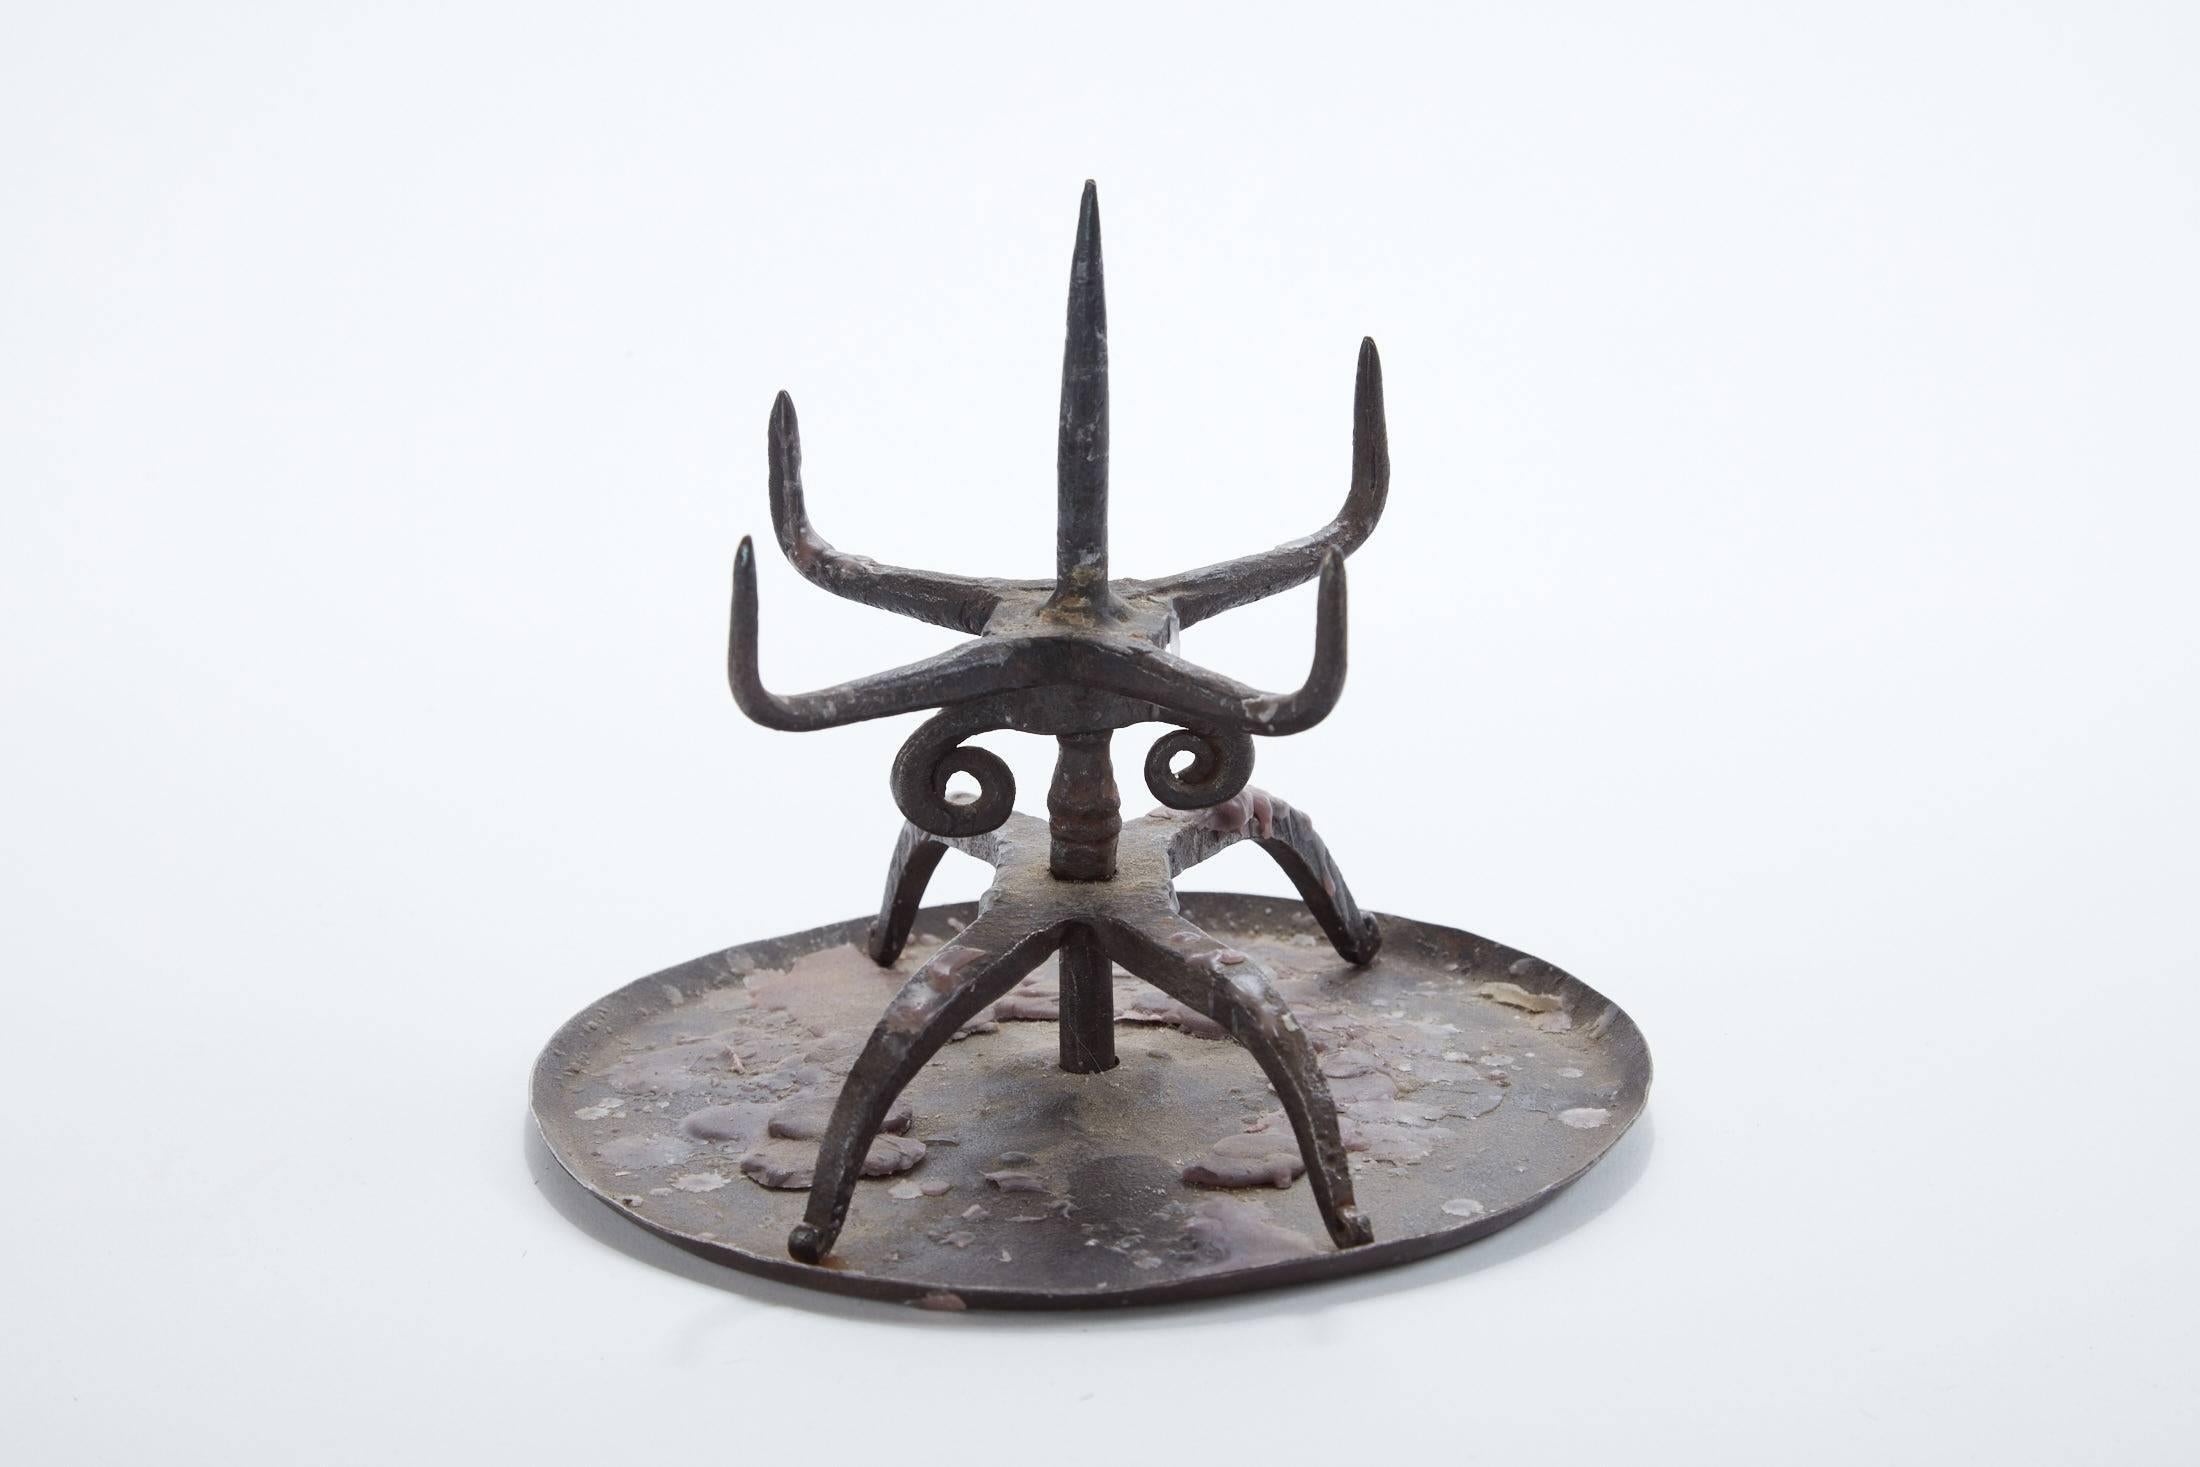 17th century German hand-forged iron candlestick.
   